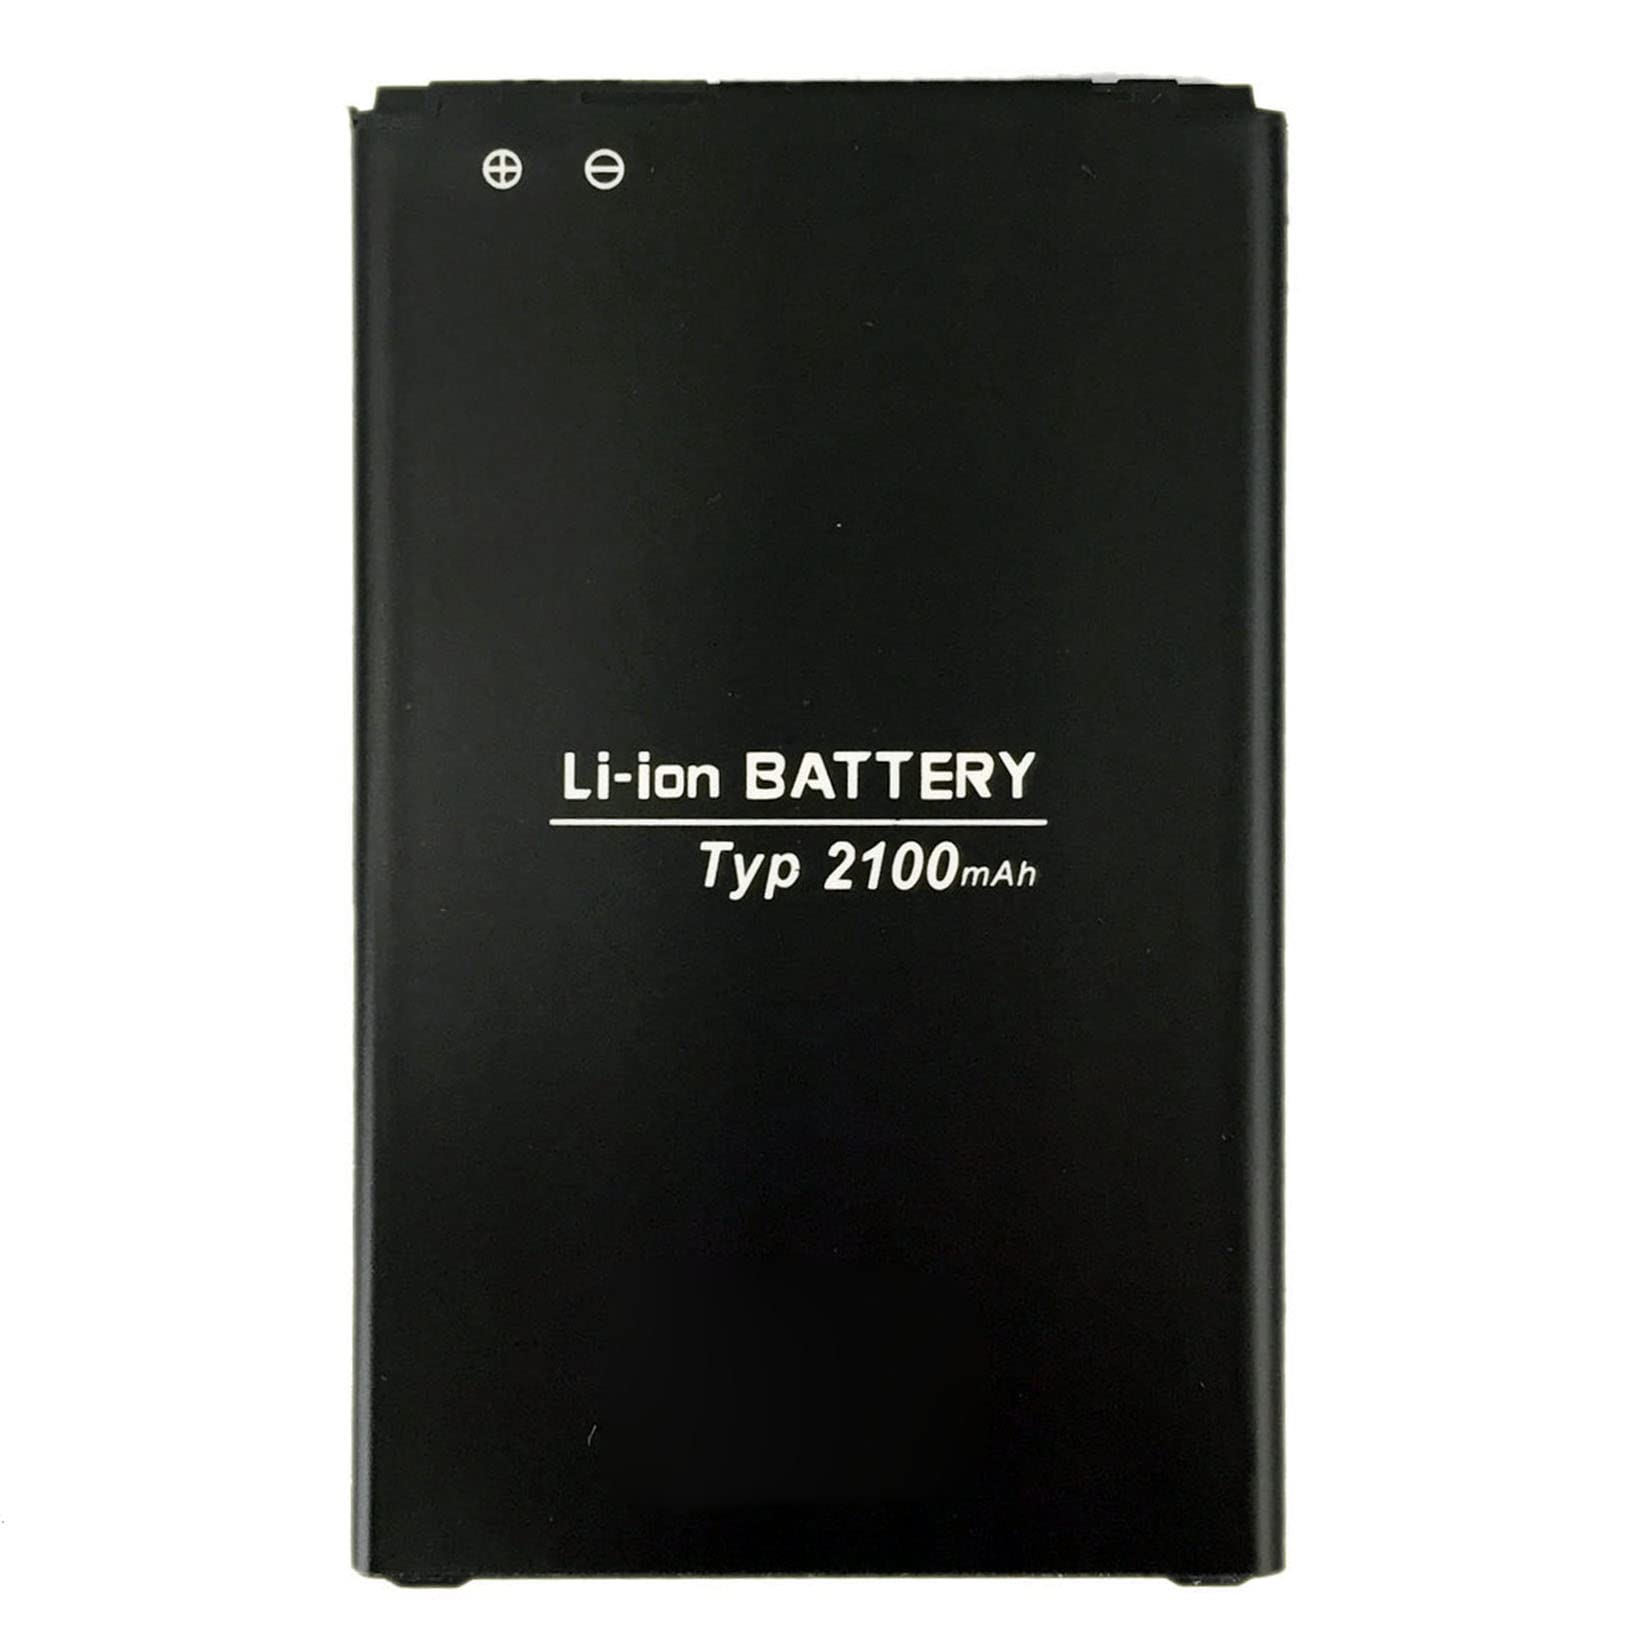 DDONG for LG Tribute HD LS676 LS660 LG X Style L56VL L53BL Replacement Battery BL-41A1HB